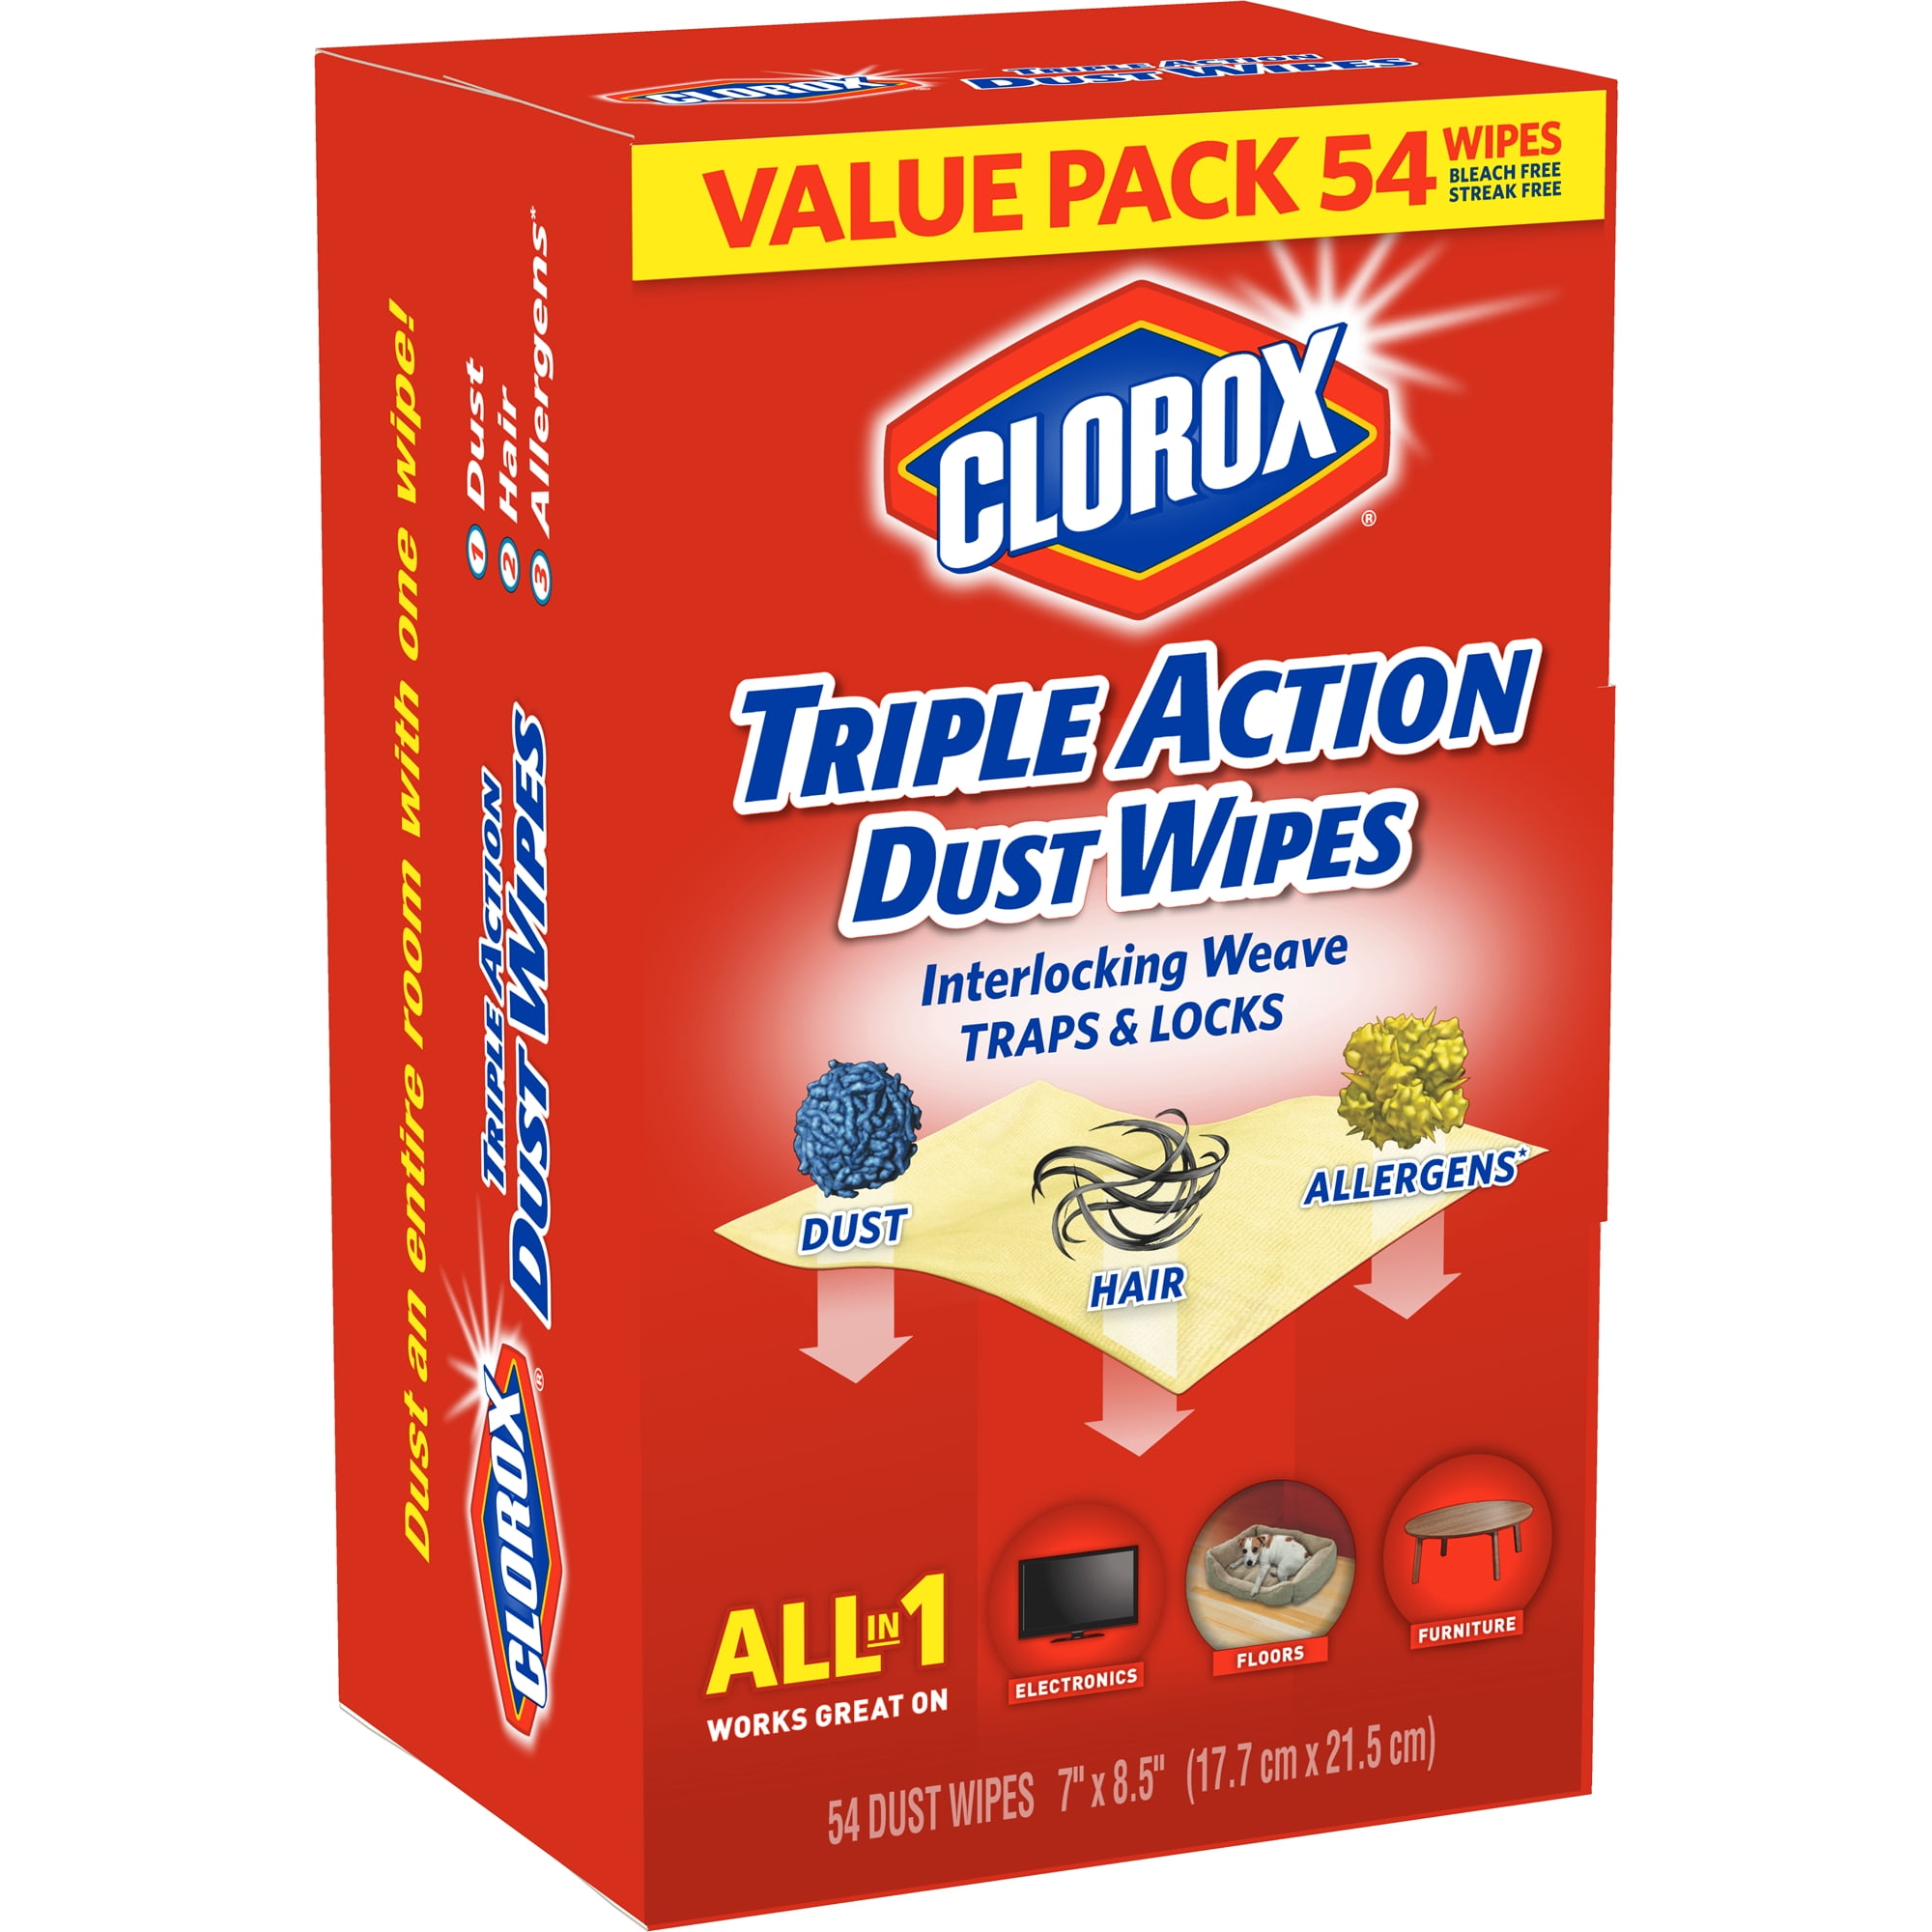 Clorox Triple Action Dust Wipes, Bleach Free Cleaning Wipes - 54 ct